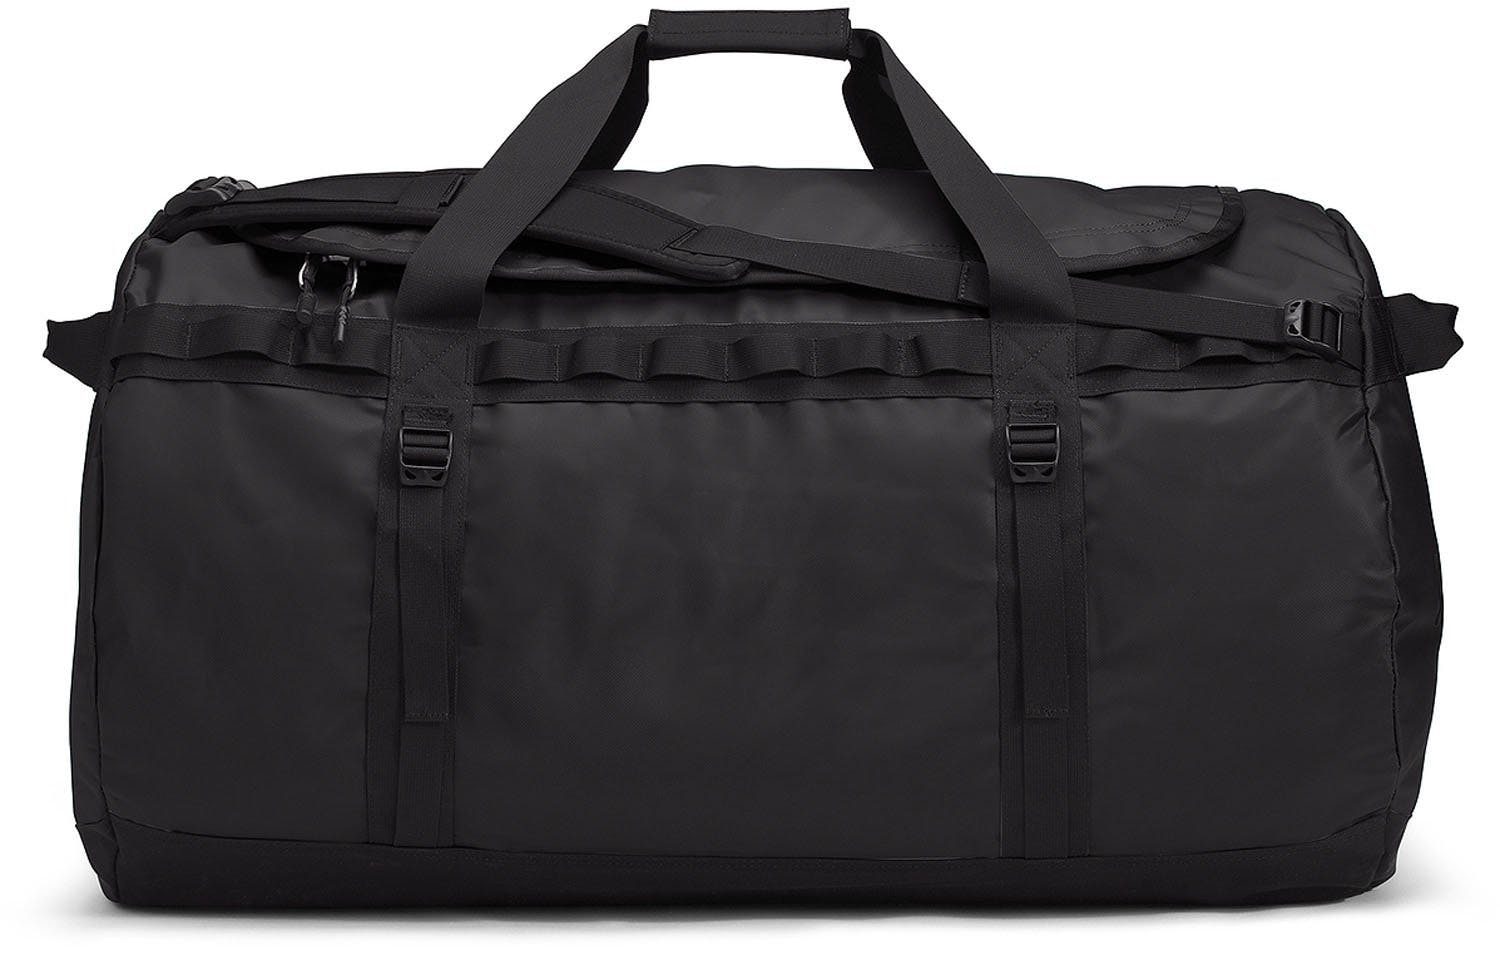 Product image for Base Camp XL Duffel Bag 132L